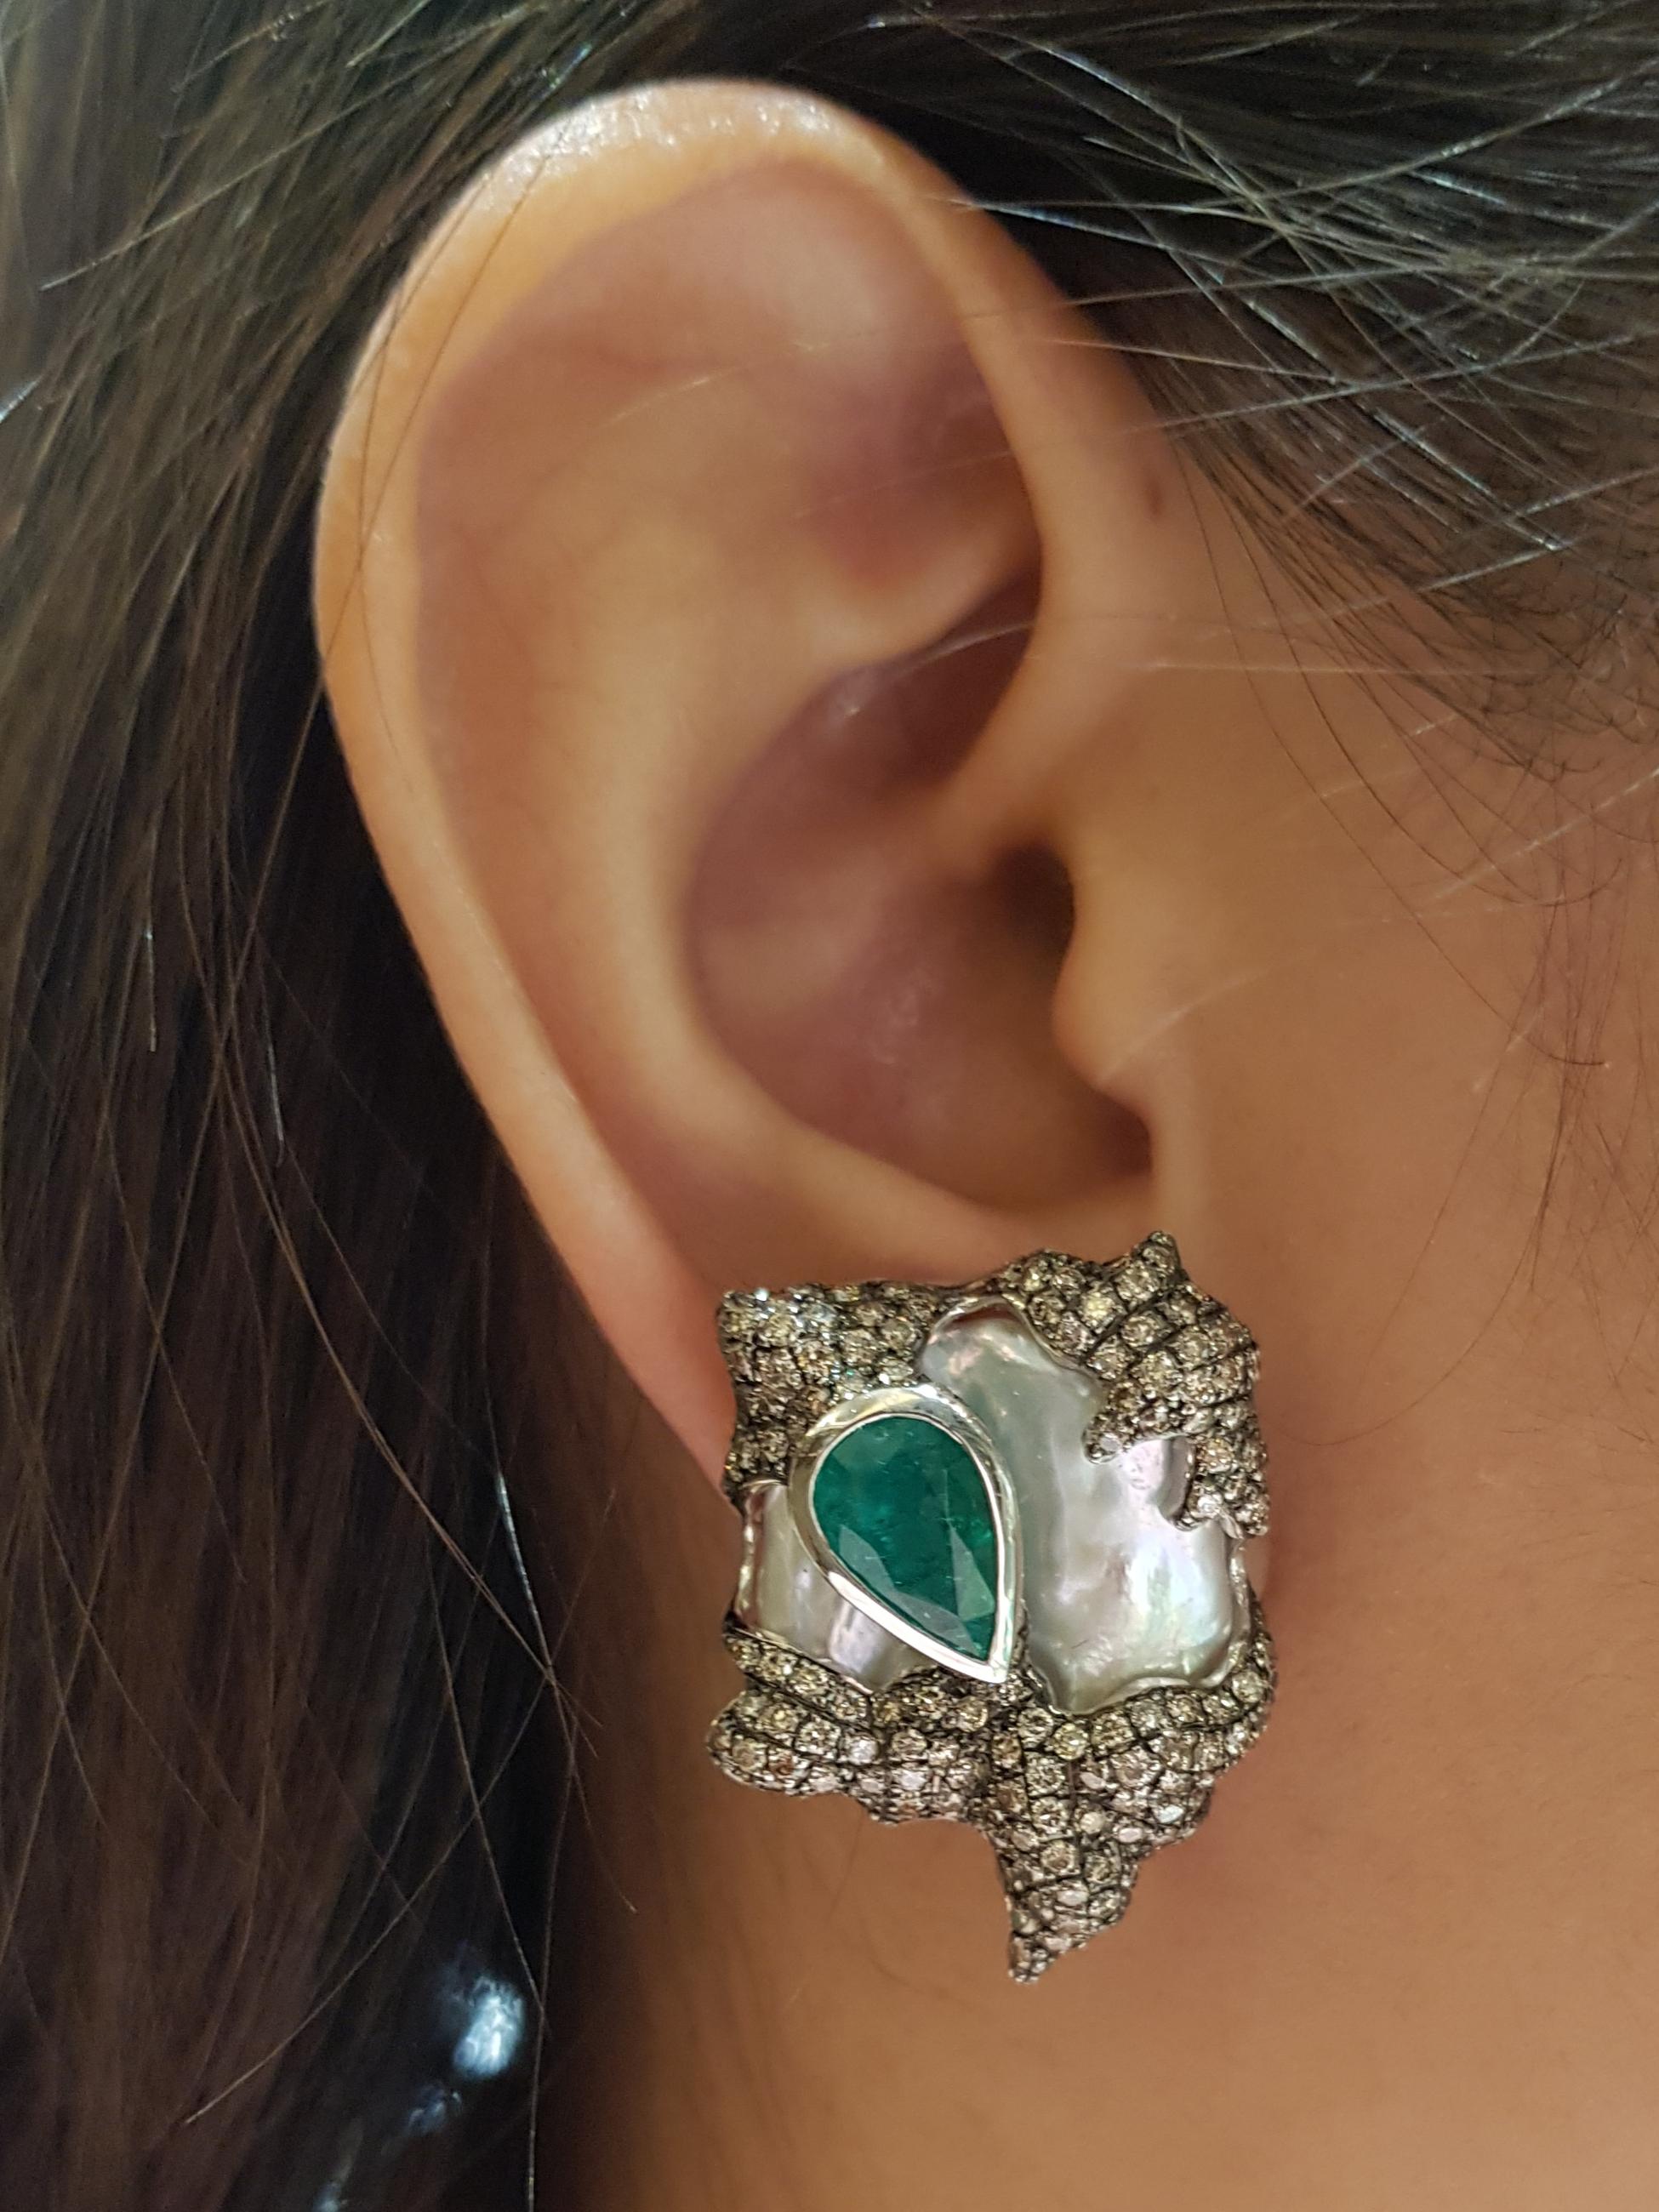 Pearl, Emerald 4.27 carats and Brown Diamond 4.33 carats Earrings set in 18 Karat White Gold Settings

Width:  2.5 cm 
Length:  3.5 cm
Total Weight: 31.23 grams

